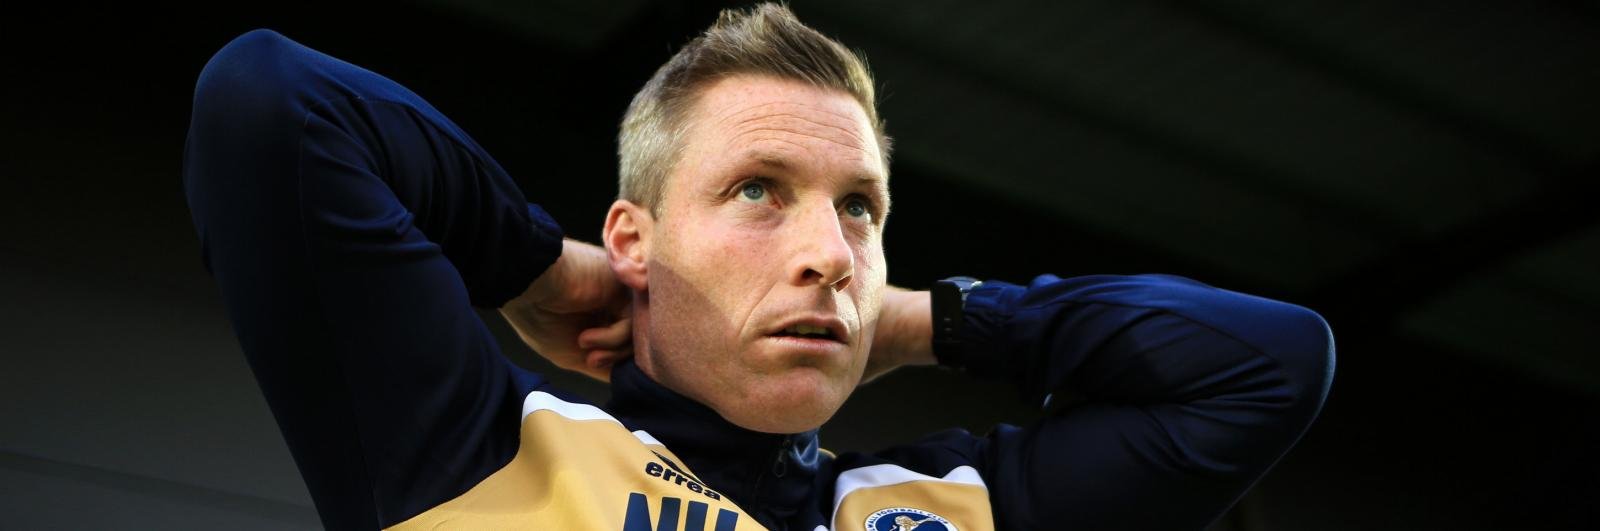 Nine goals, two wins and one draw – Millwall have hit the ground running